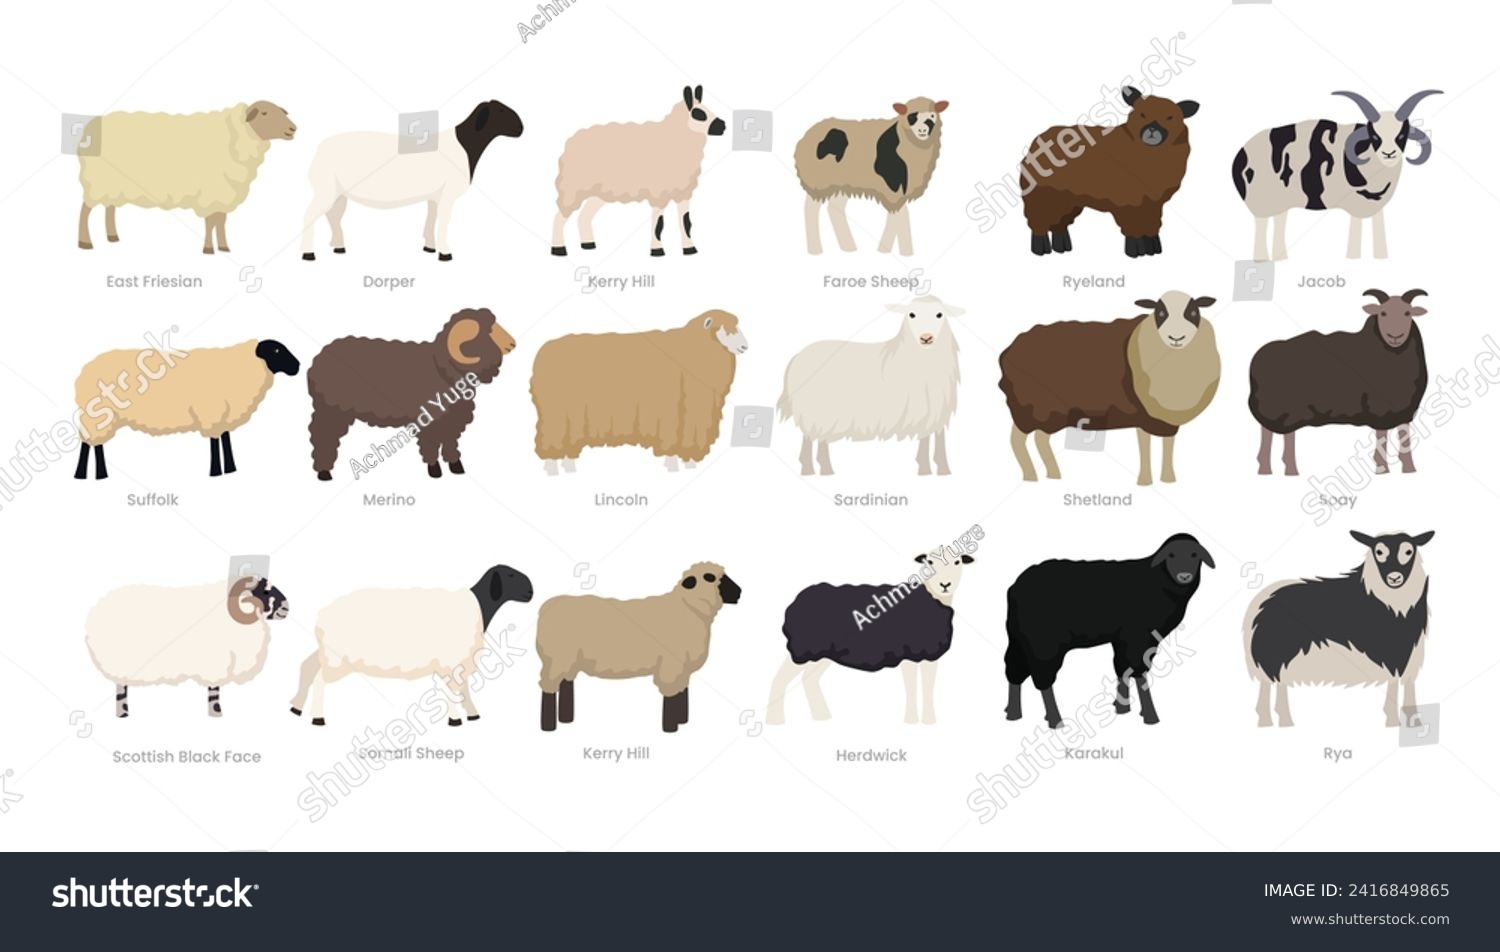 SVG of Different types of sheep set collection, breeds of domestic sheep cartoon, dairy farming, lamb sheep vector illustration, suitable for education poster infographic guide catalog, flat style svg